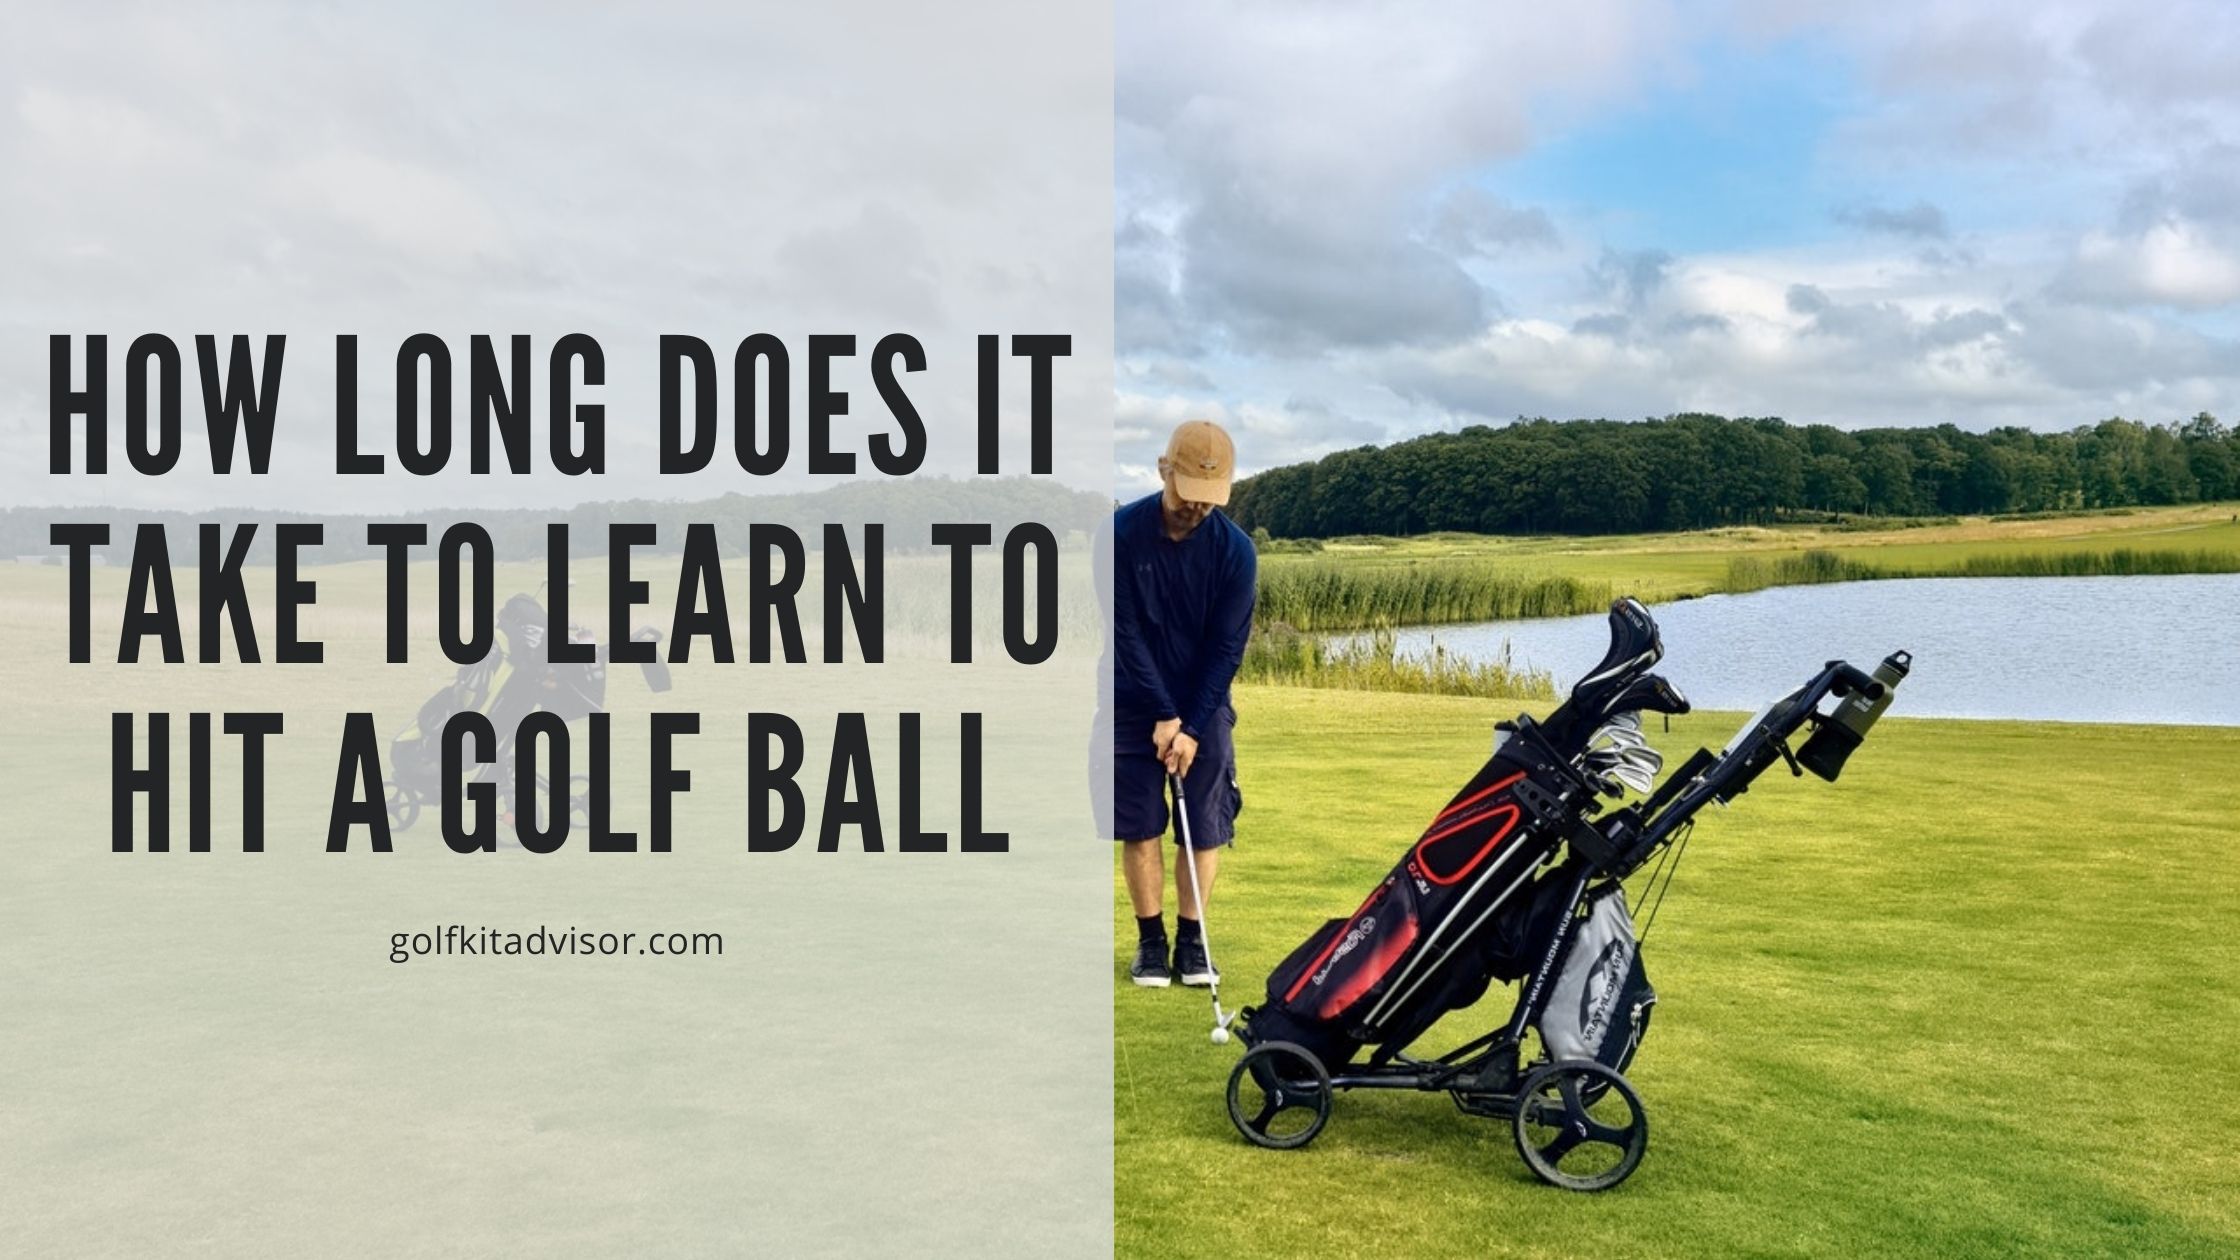 How Long Does It Take To Learn To Hit A Golf Ball